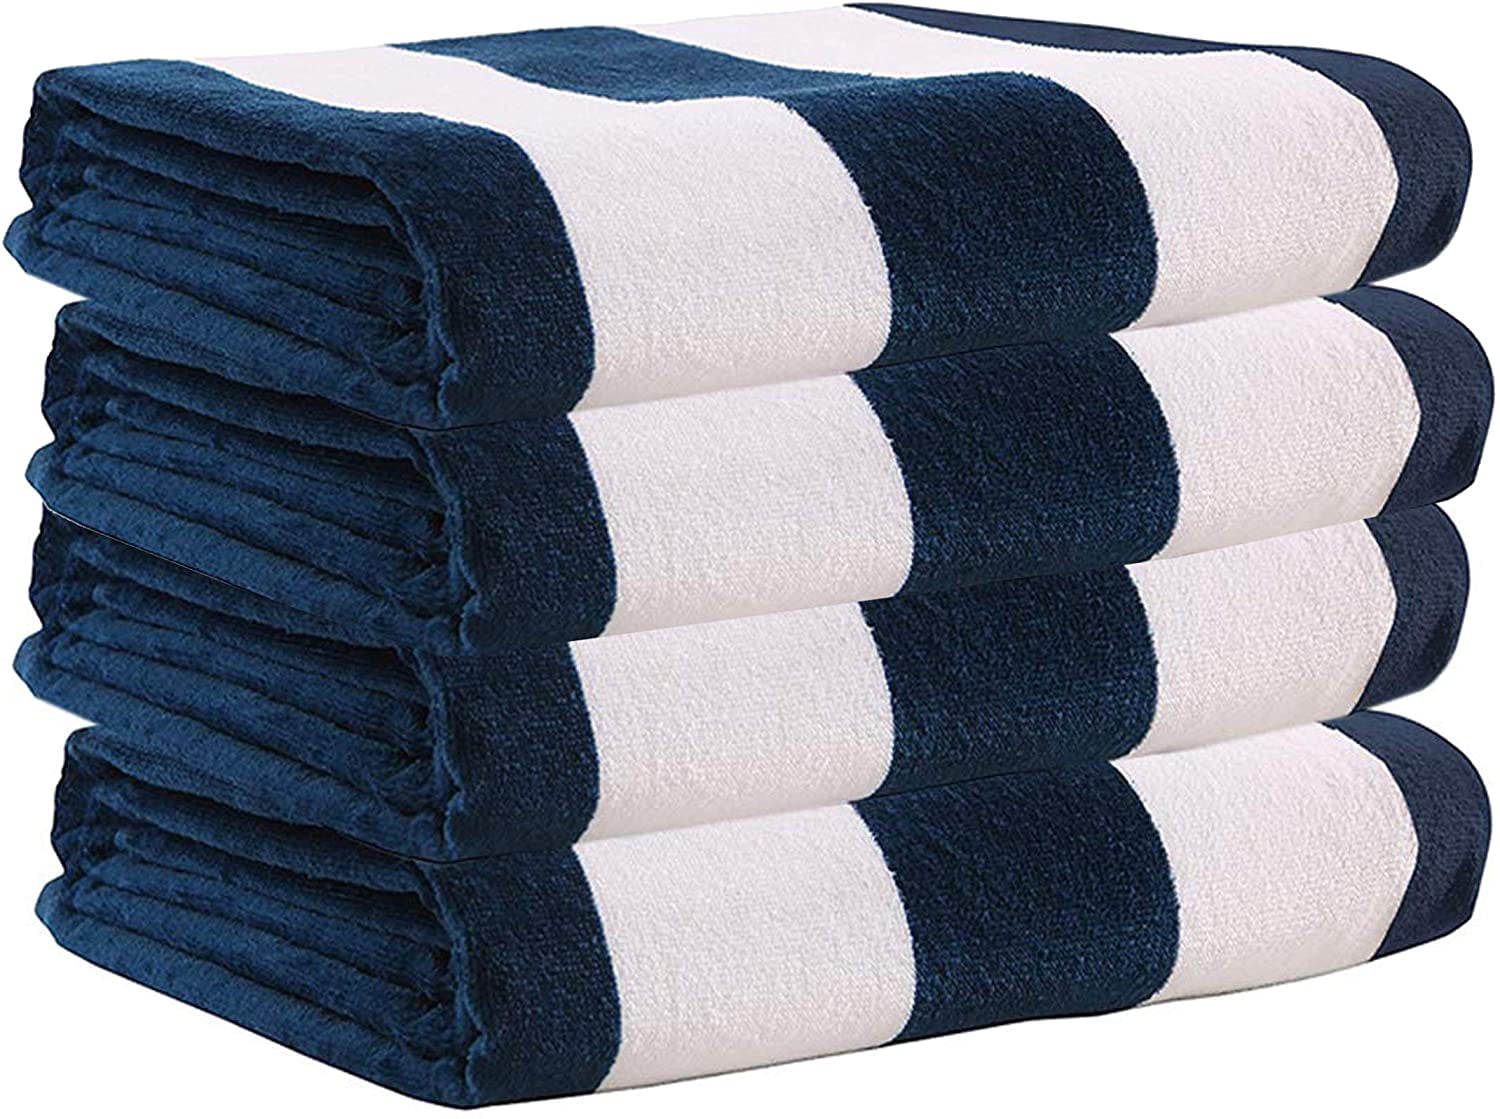 Cotton bath towel Pool Striped beach Towel Soft Lightweight Absorbent and Plush 